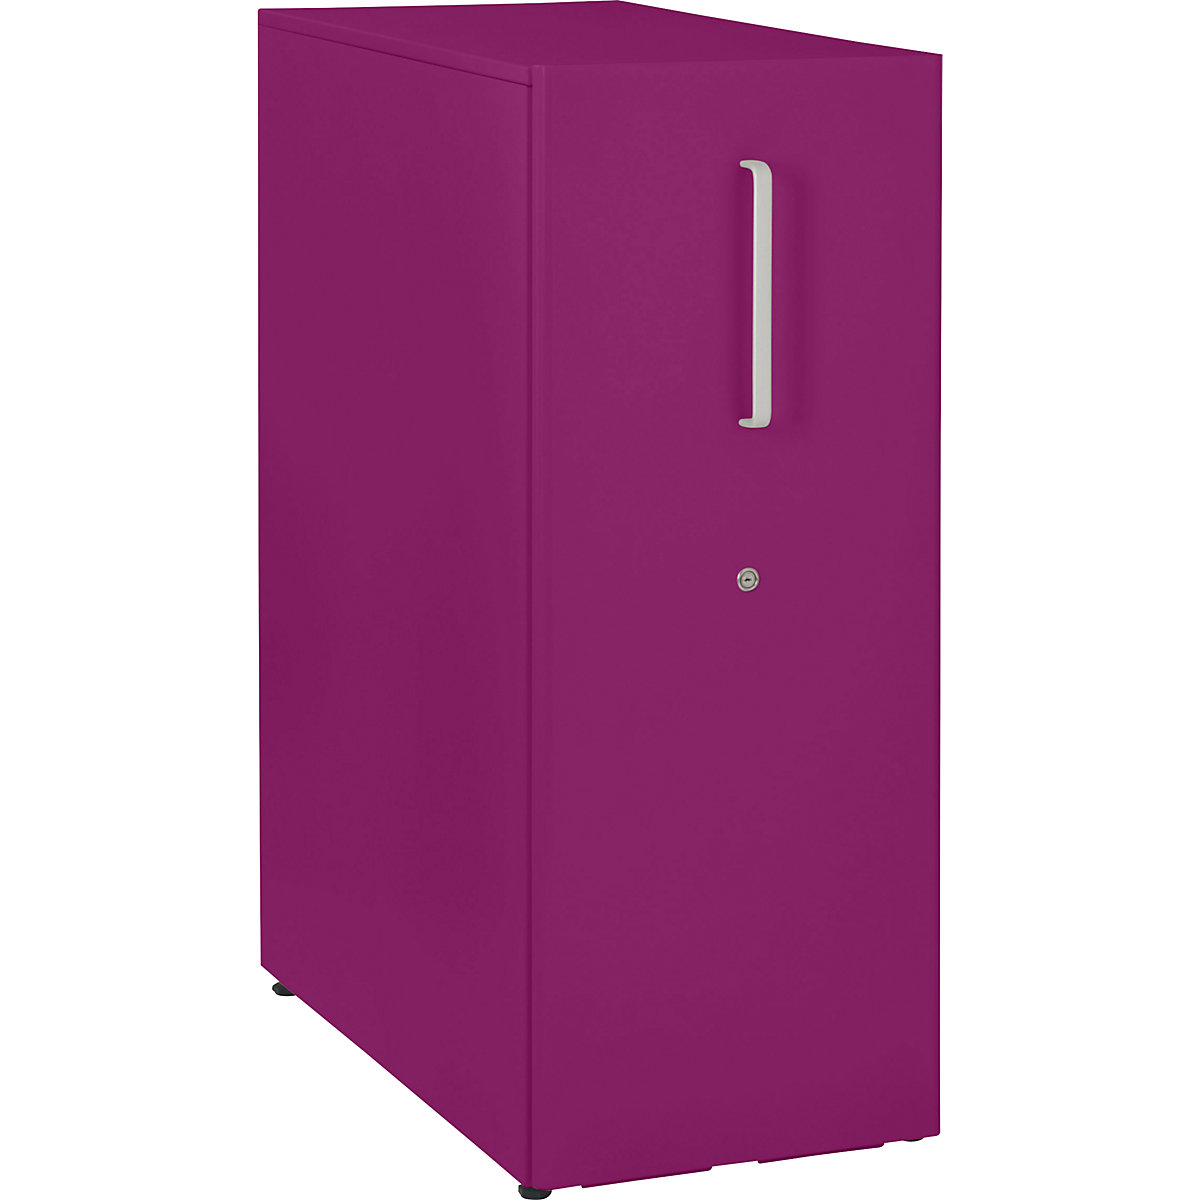 Tower™ 3 add-on furniture, with worktop – BISLEY, for the left side, 3 shelves, fuchsia-14